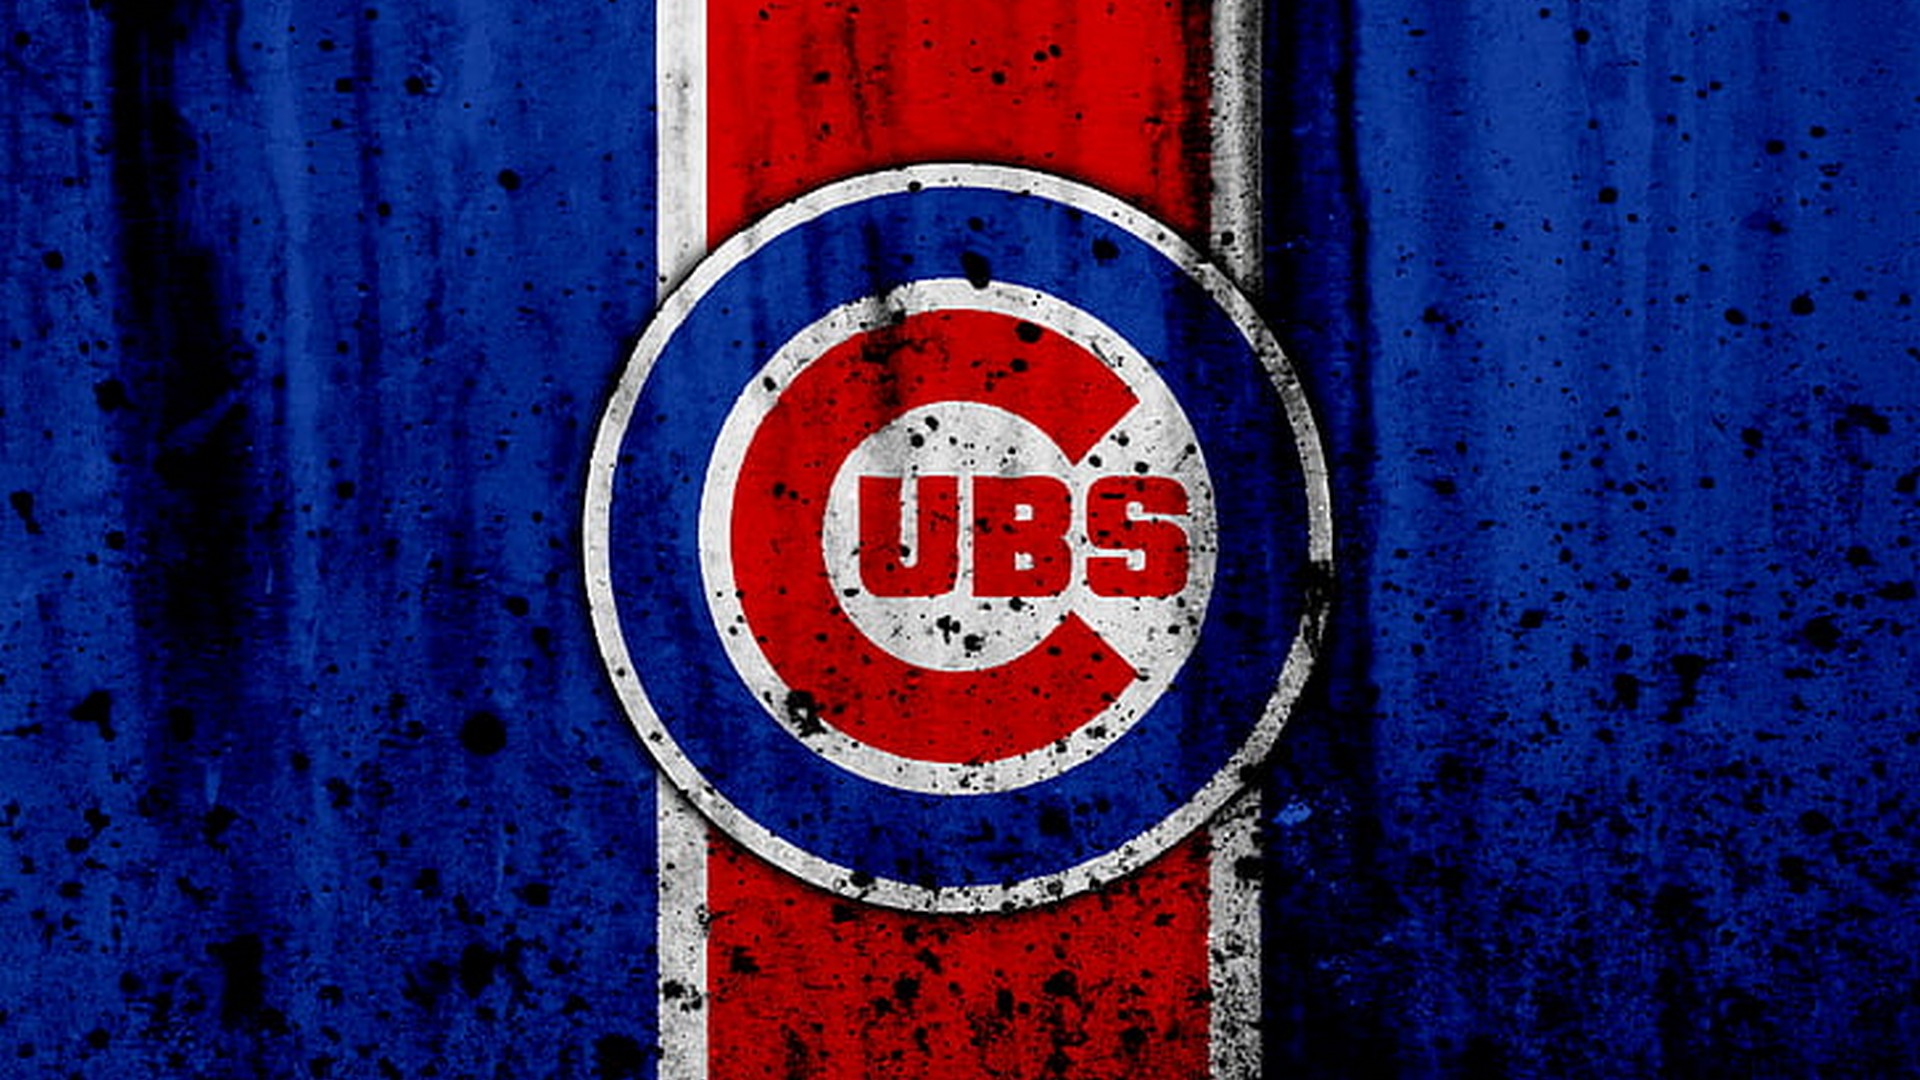 HD Desktop Wallpaper Chicago Cubs with high-resolution 1920x1080 pixel. You can use this wallpaper for Mac Desktop Wallpaper, Laptop Screensavers, Android Wallpapers, Tablet or iPhone Home Screen and another mobile phone device